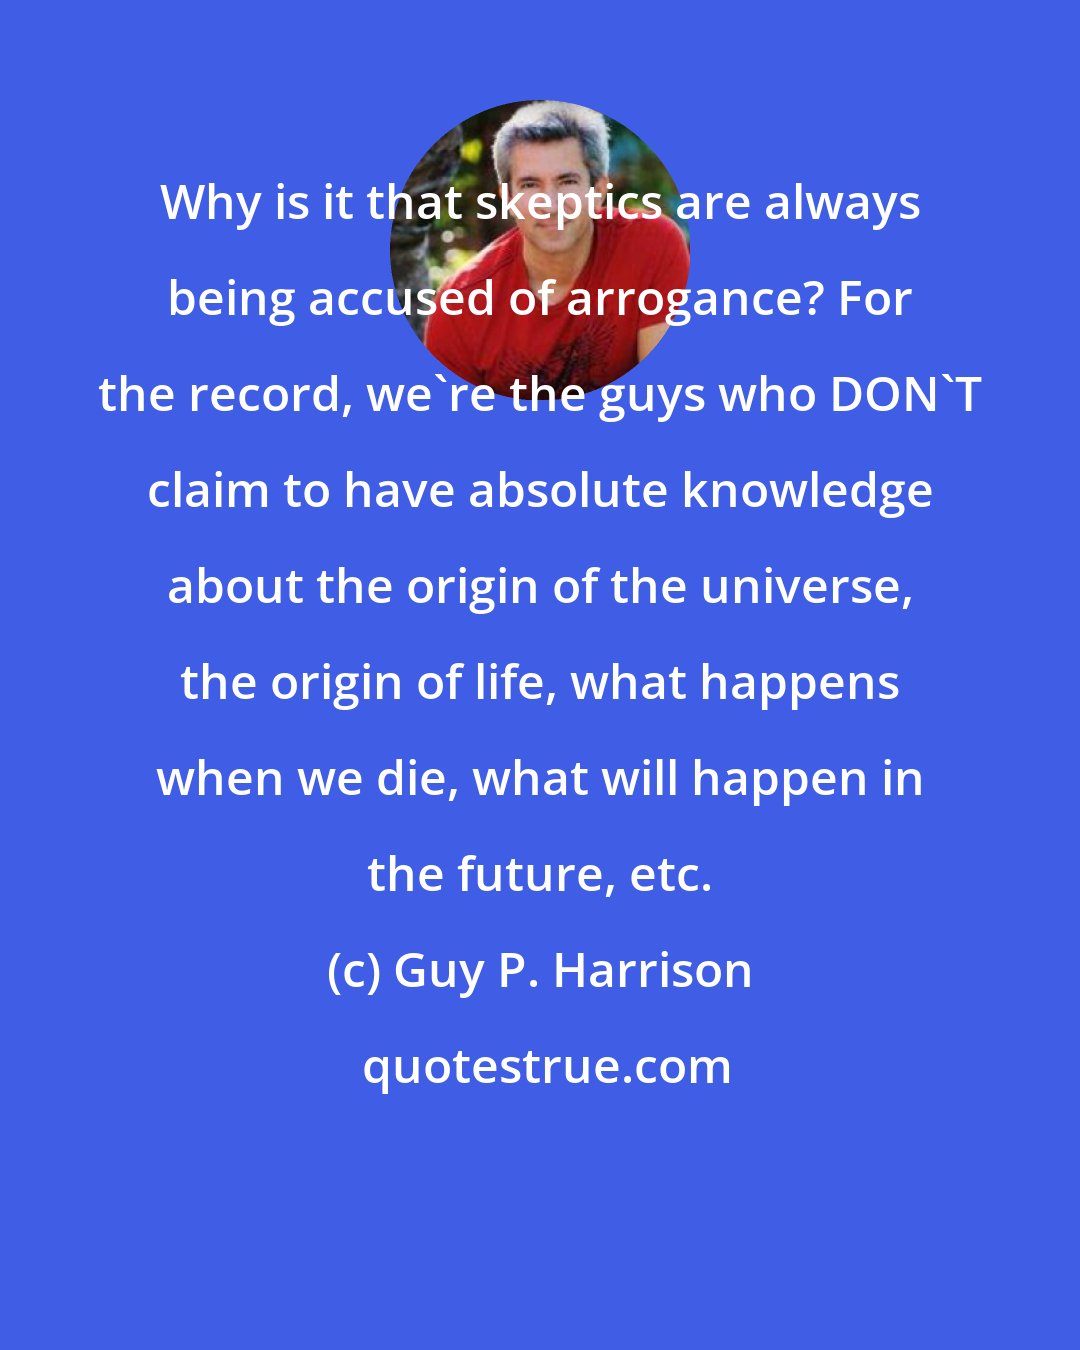 Guy P. Harrison: Why is it that skeptics are always being accused of arrogance? For the record, we're the guys who DON'T claim to have absolute knowledge about the origin of the universe, the origin of life, what happens when we die, what will happen in the future, etc.